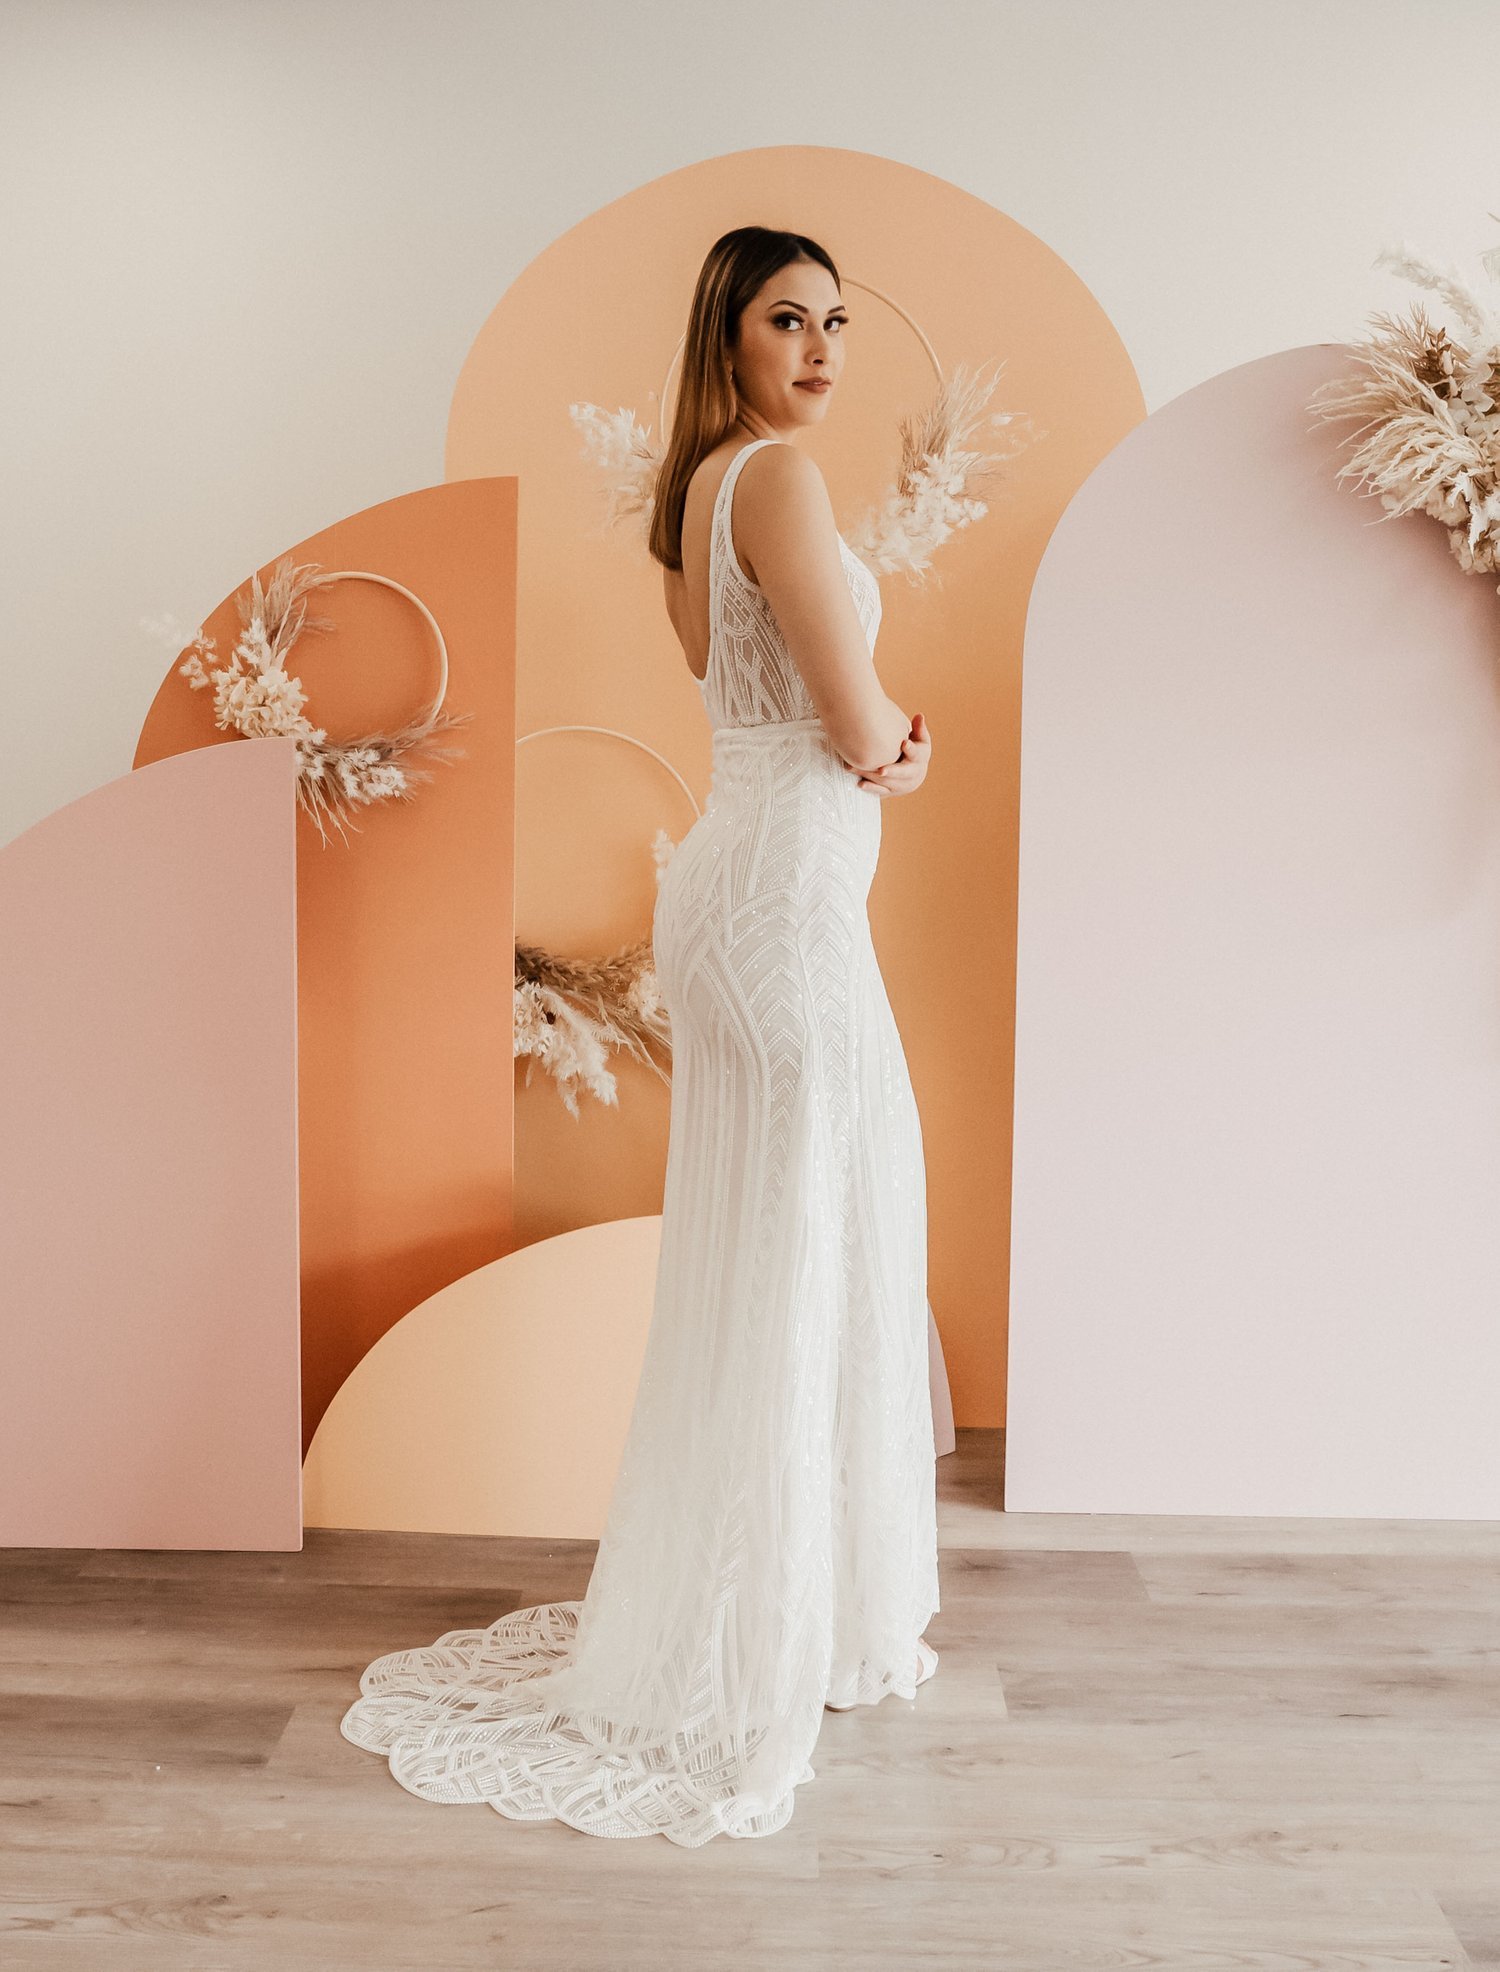 What Style of Wedding Dress is Best for Outdoor Weddings?